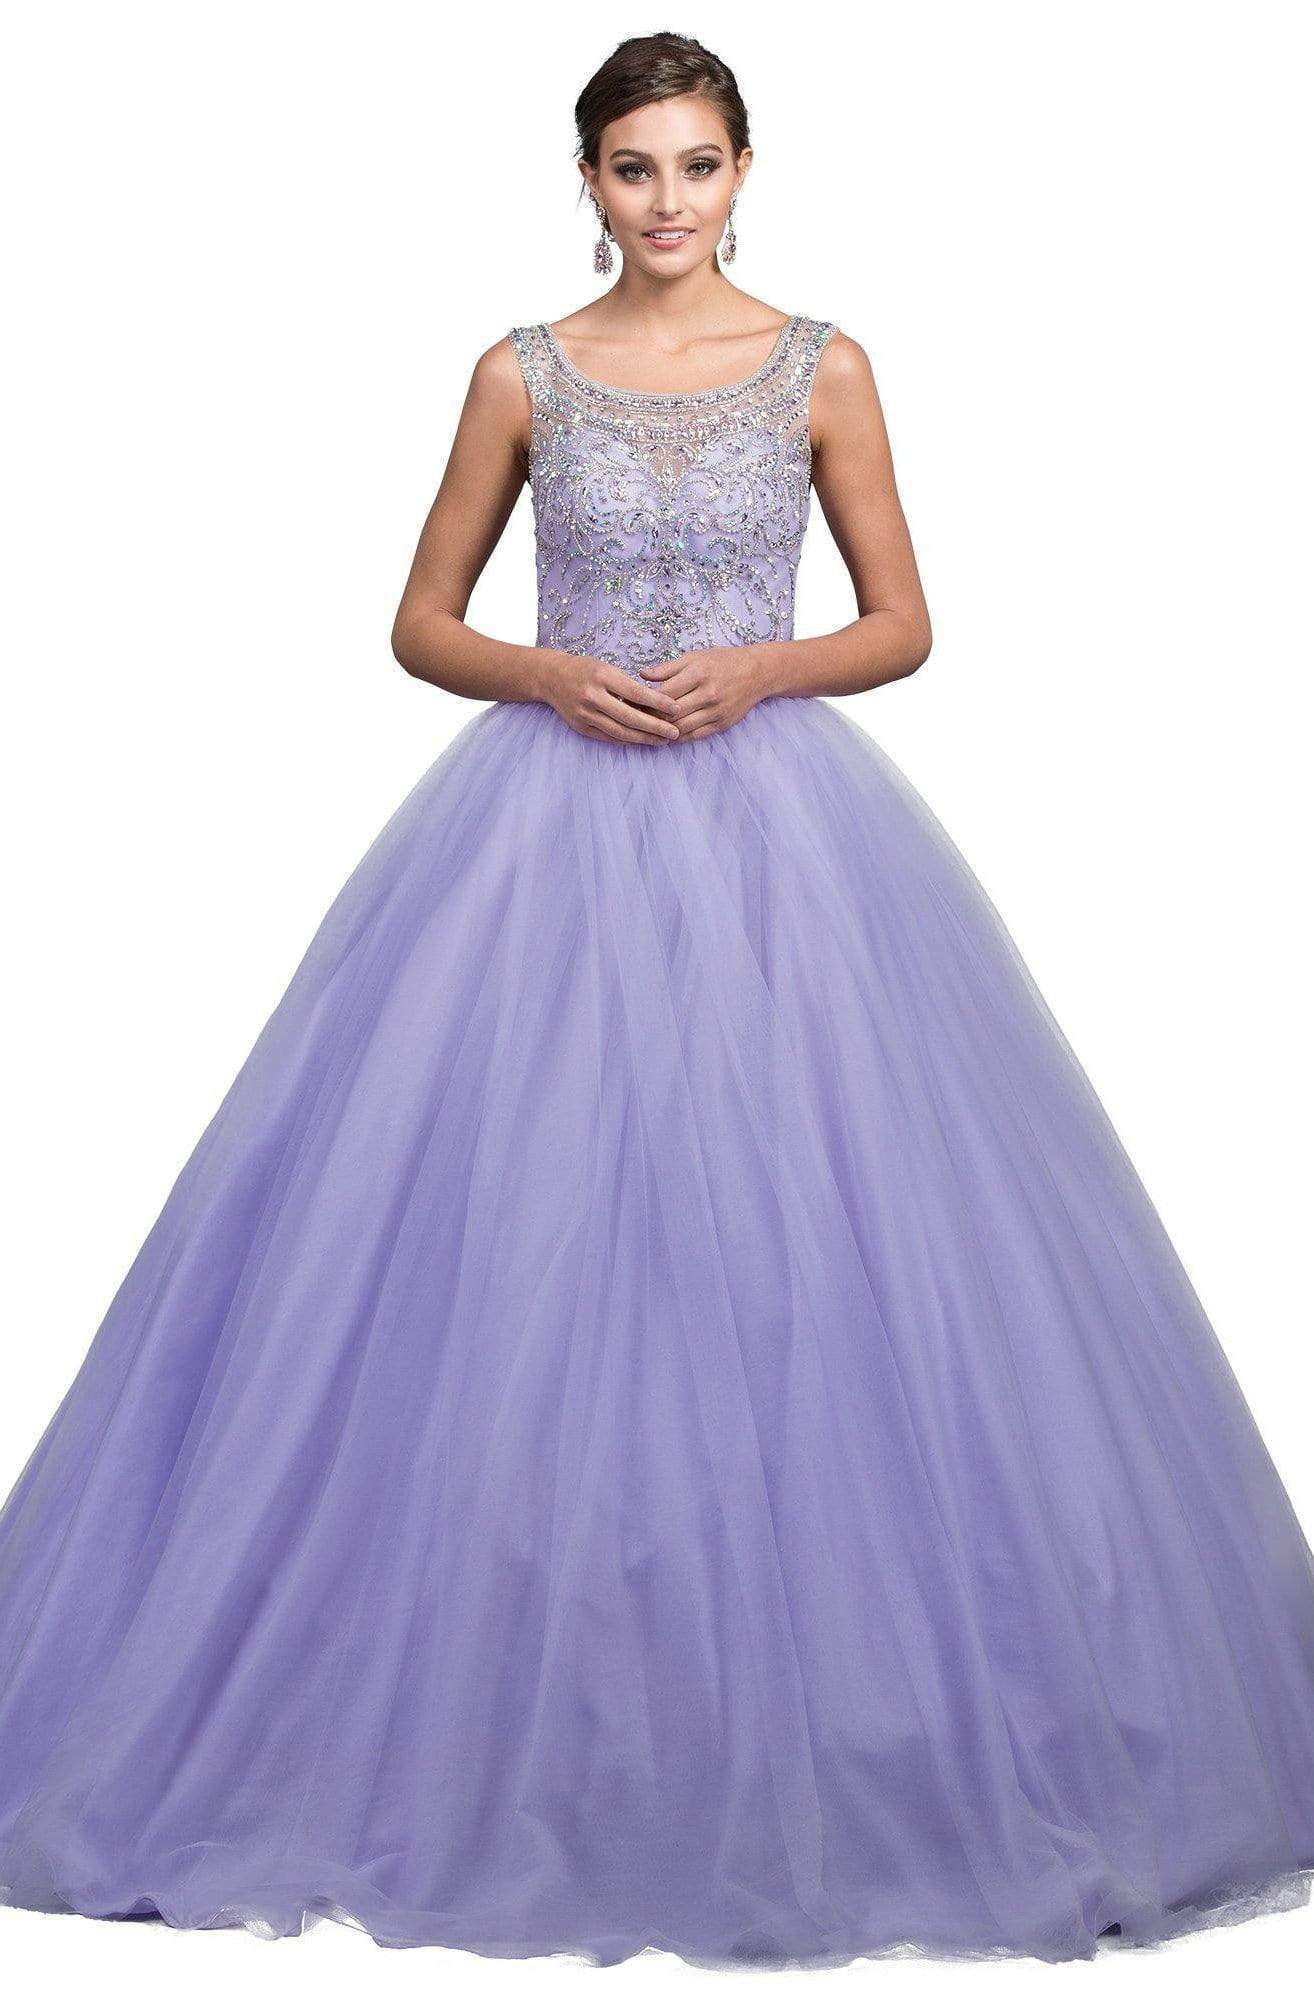 Image of Dancing Queen - 1194A Jeweled Illusion Scoop Bodice Ballgown